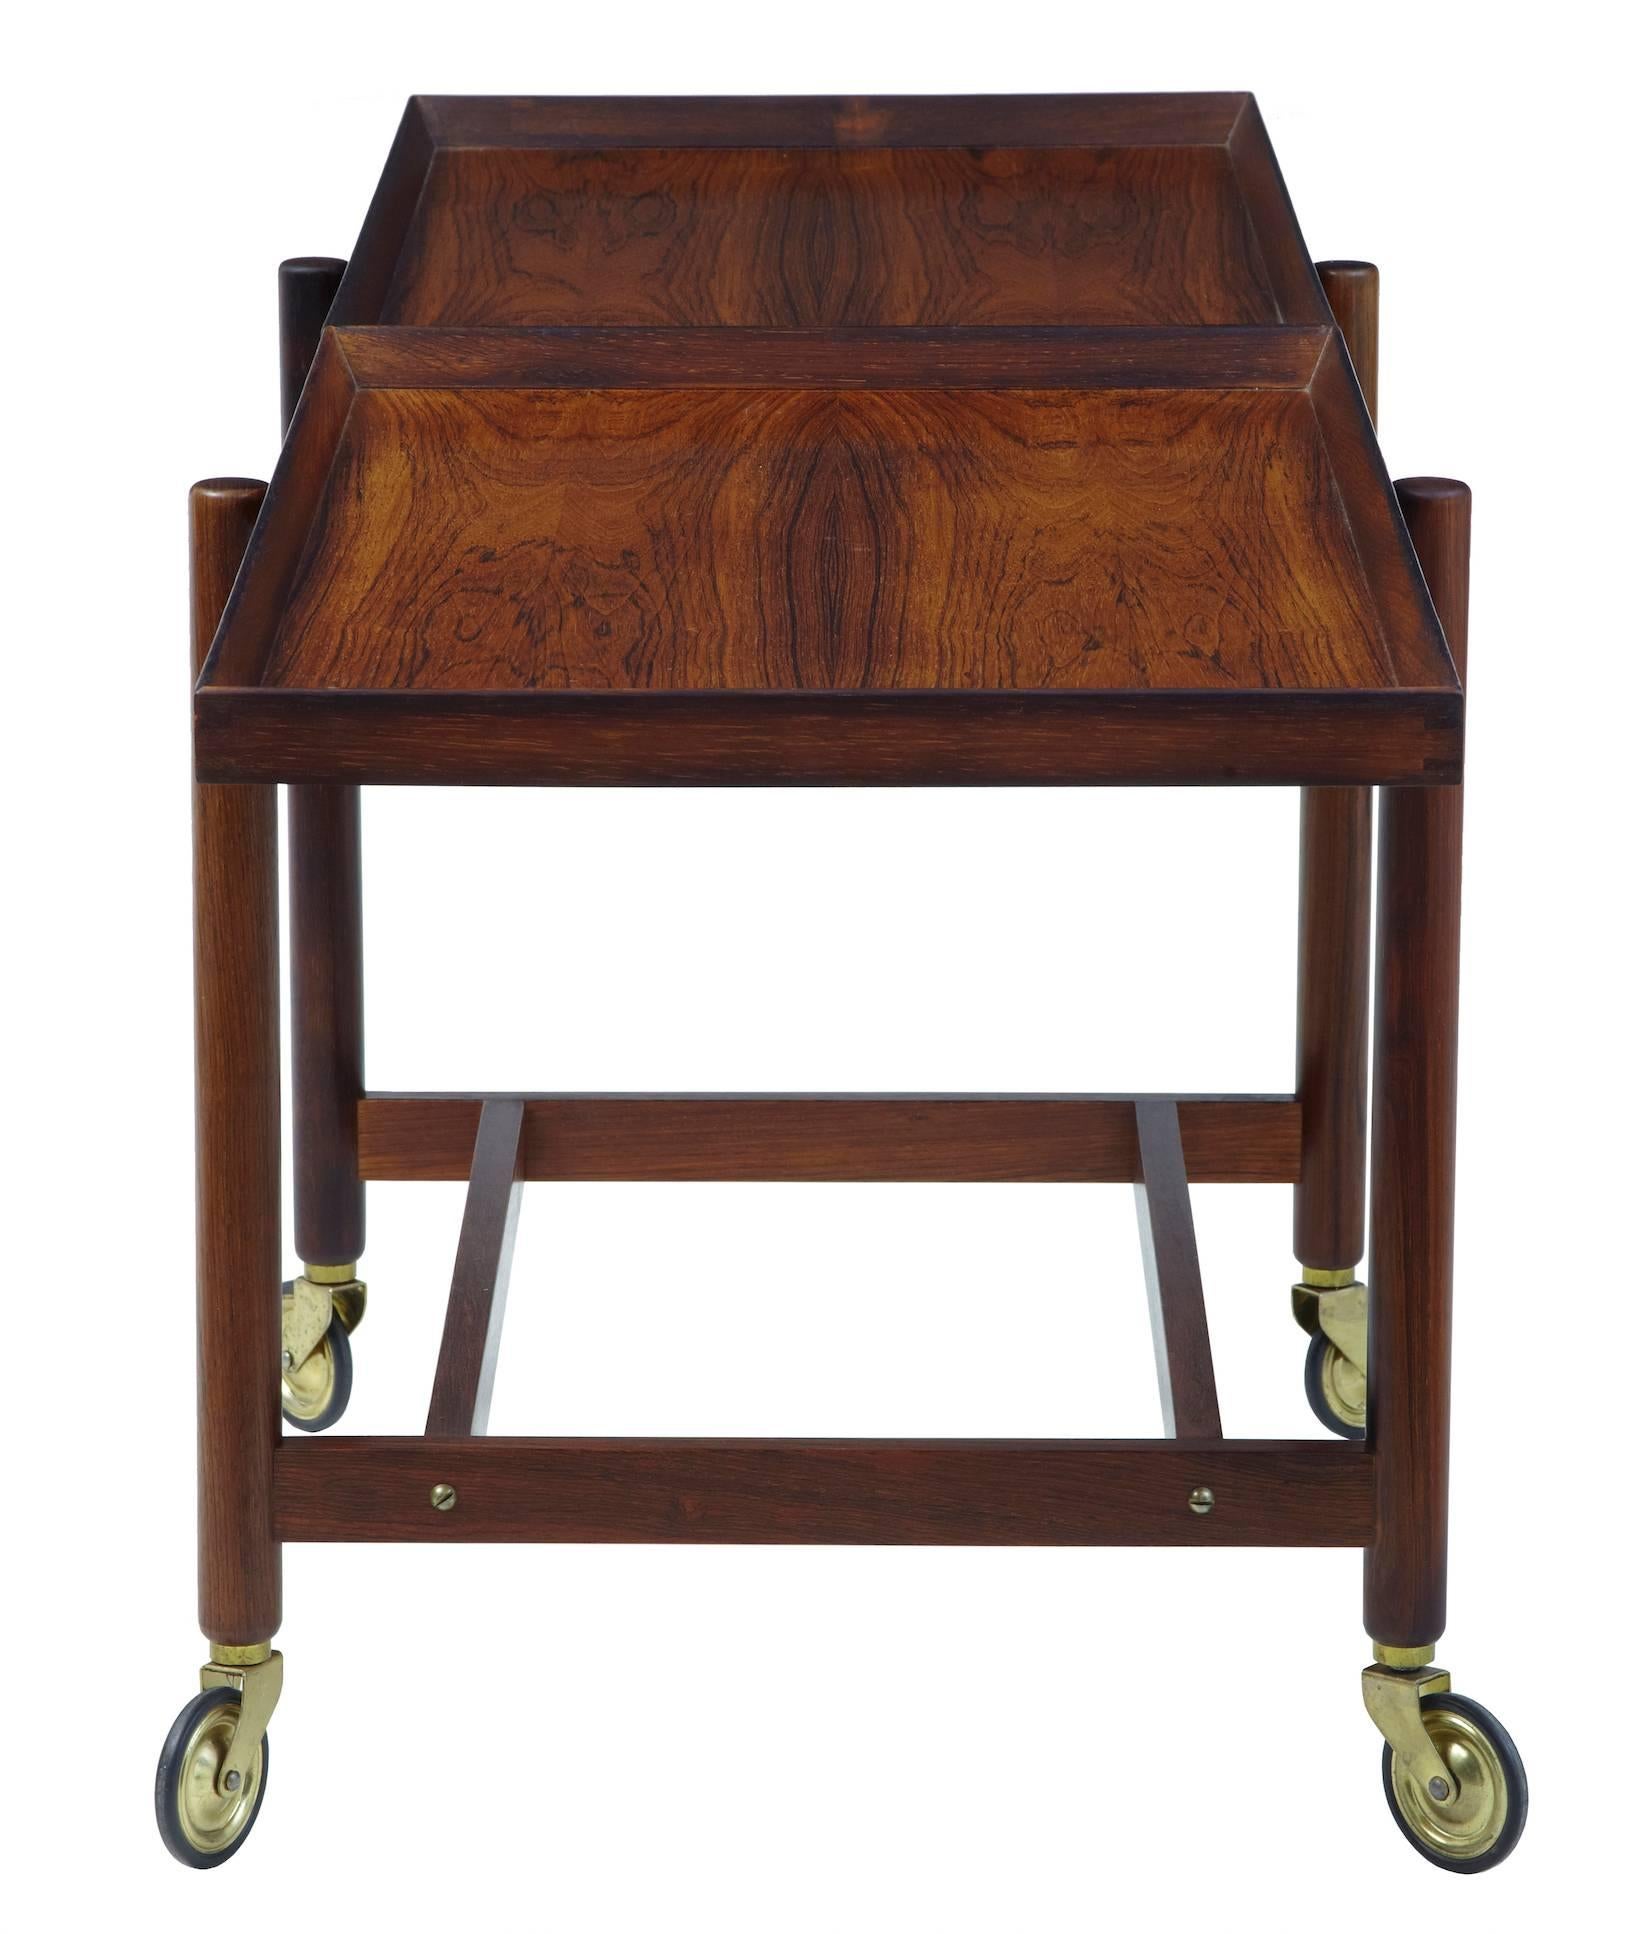 Striking rosewood trolley by well-known designer Poul Hundevad, circa 1960.
Sliding top and removable bottom tier which can be placed alongside the top tier to double the serving length.
Standing on brass wheels with rubberised tred.

Measures: